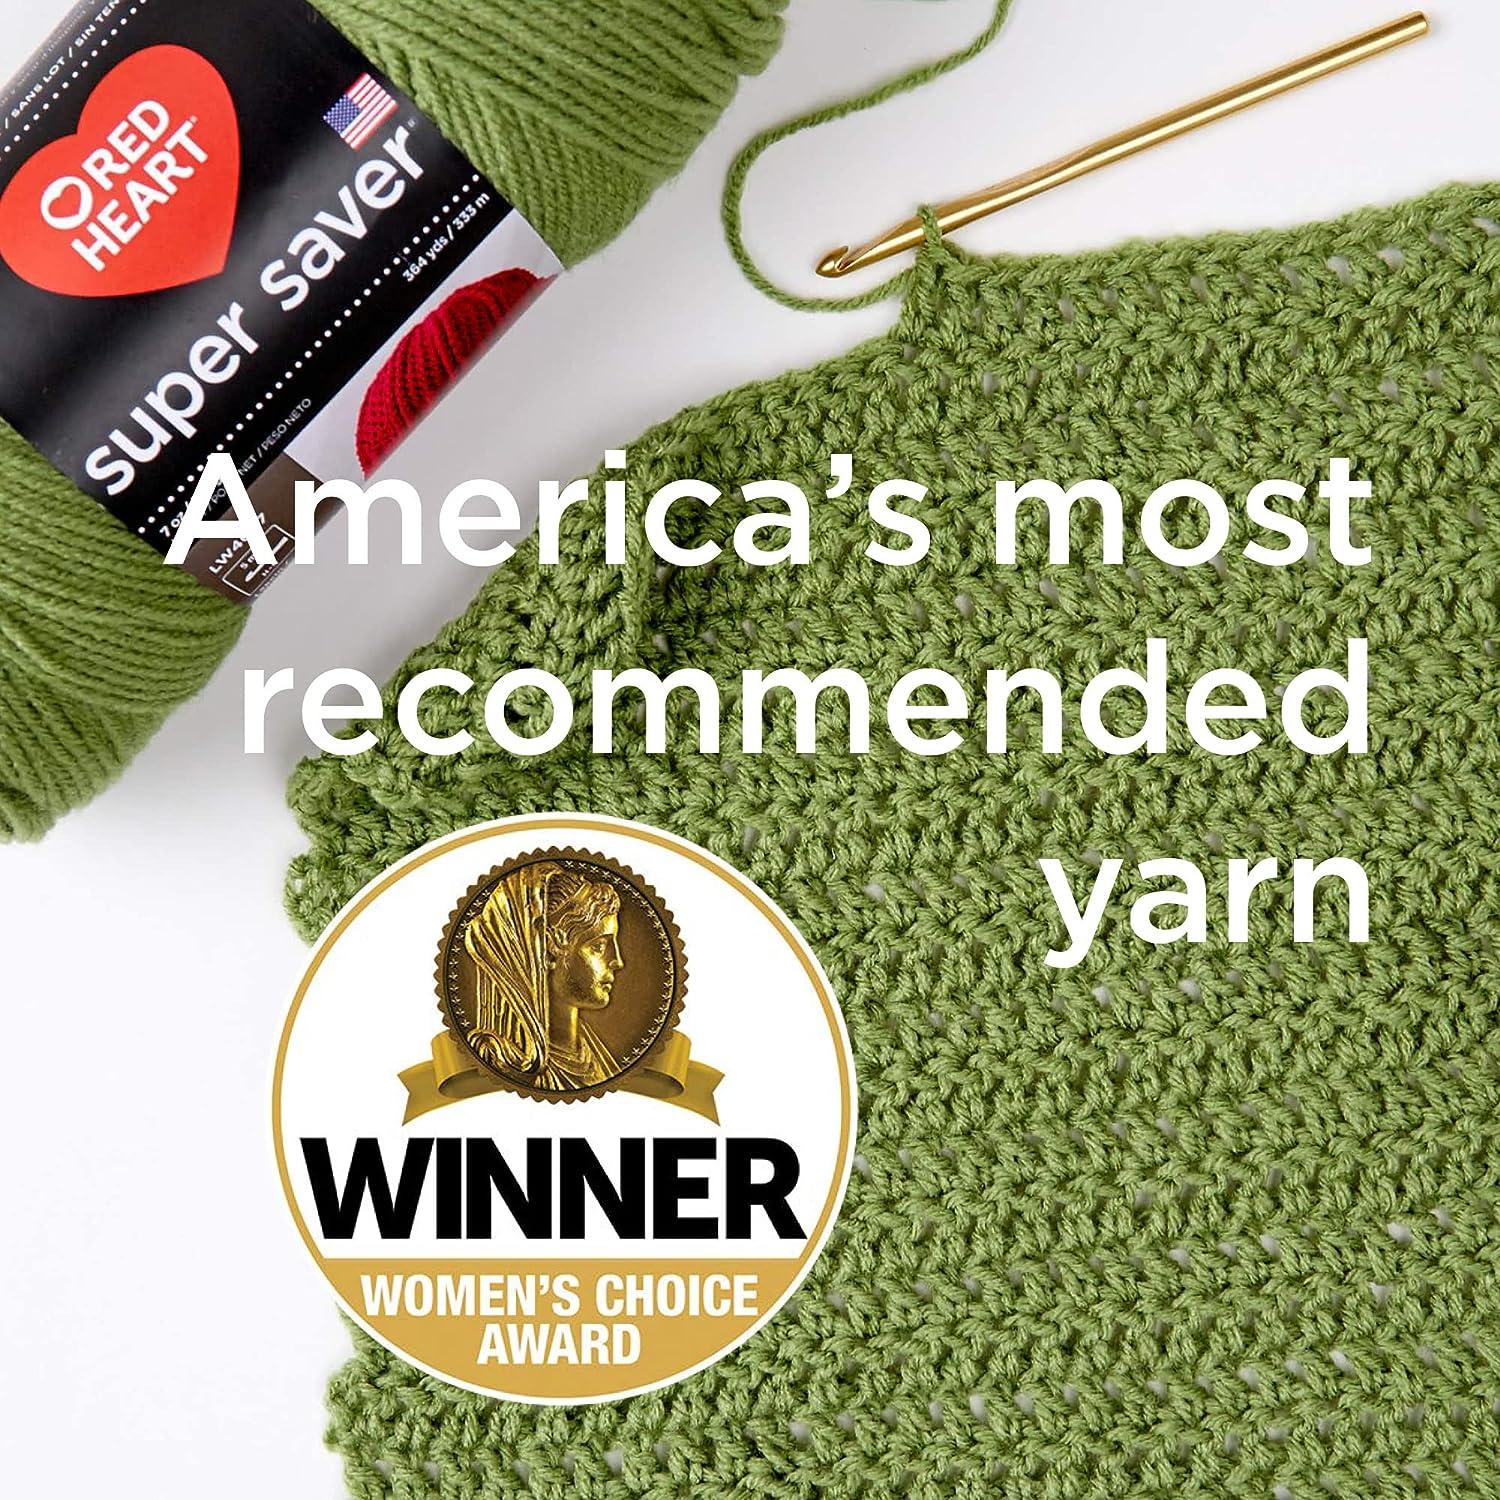 Red Heart Super Saver Stripes Clearance Yarn by Red Heart